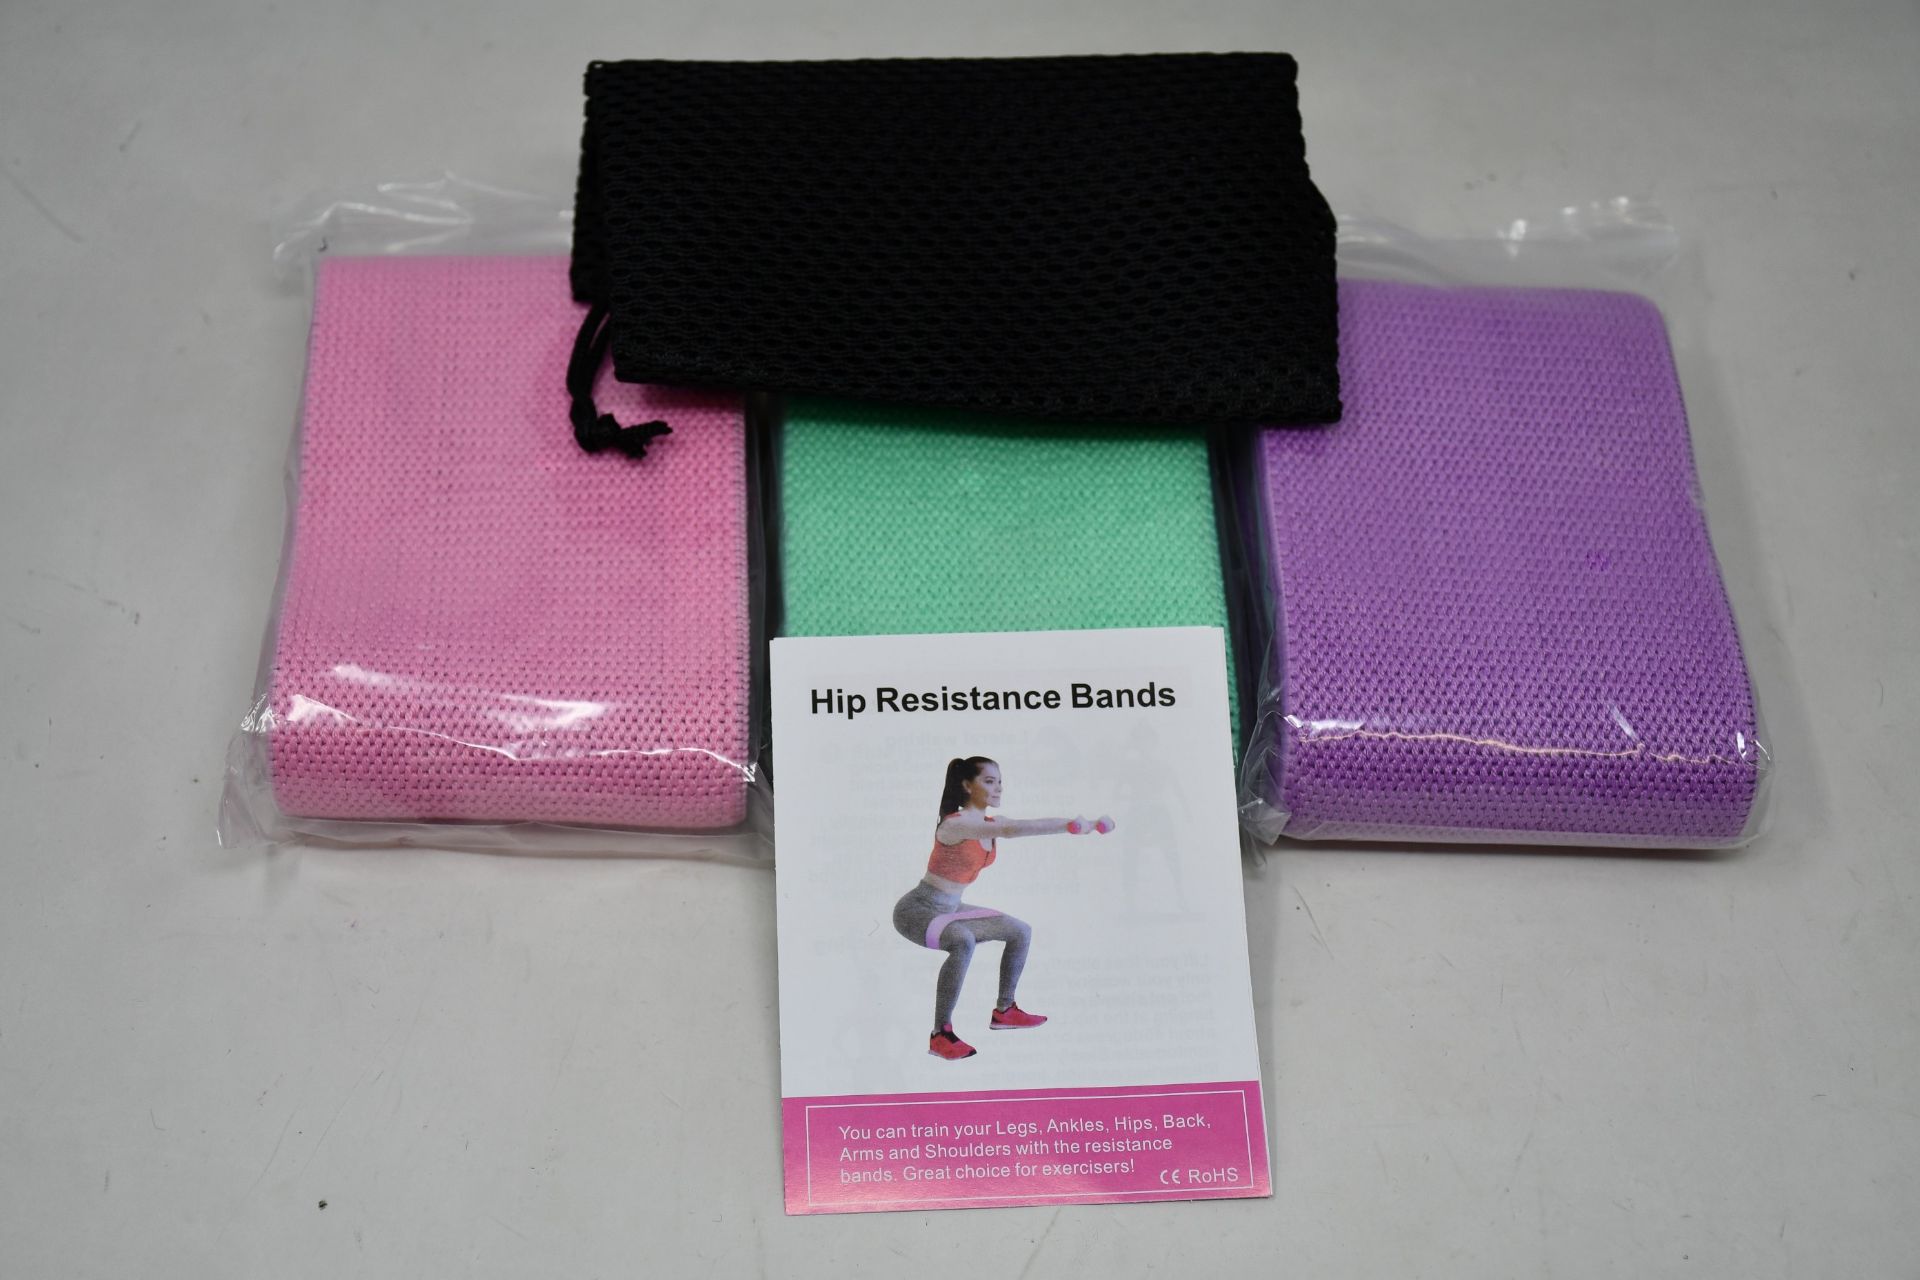 Ten packets of Very Well hip resistance bands (Three bands per packet).